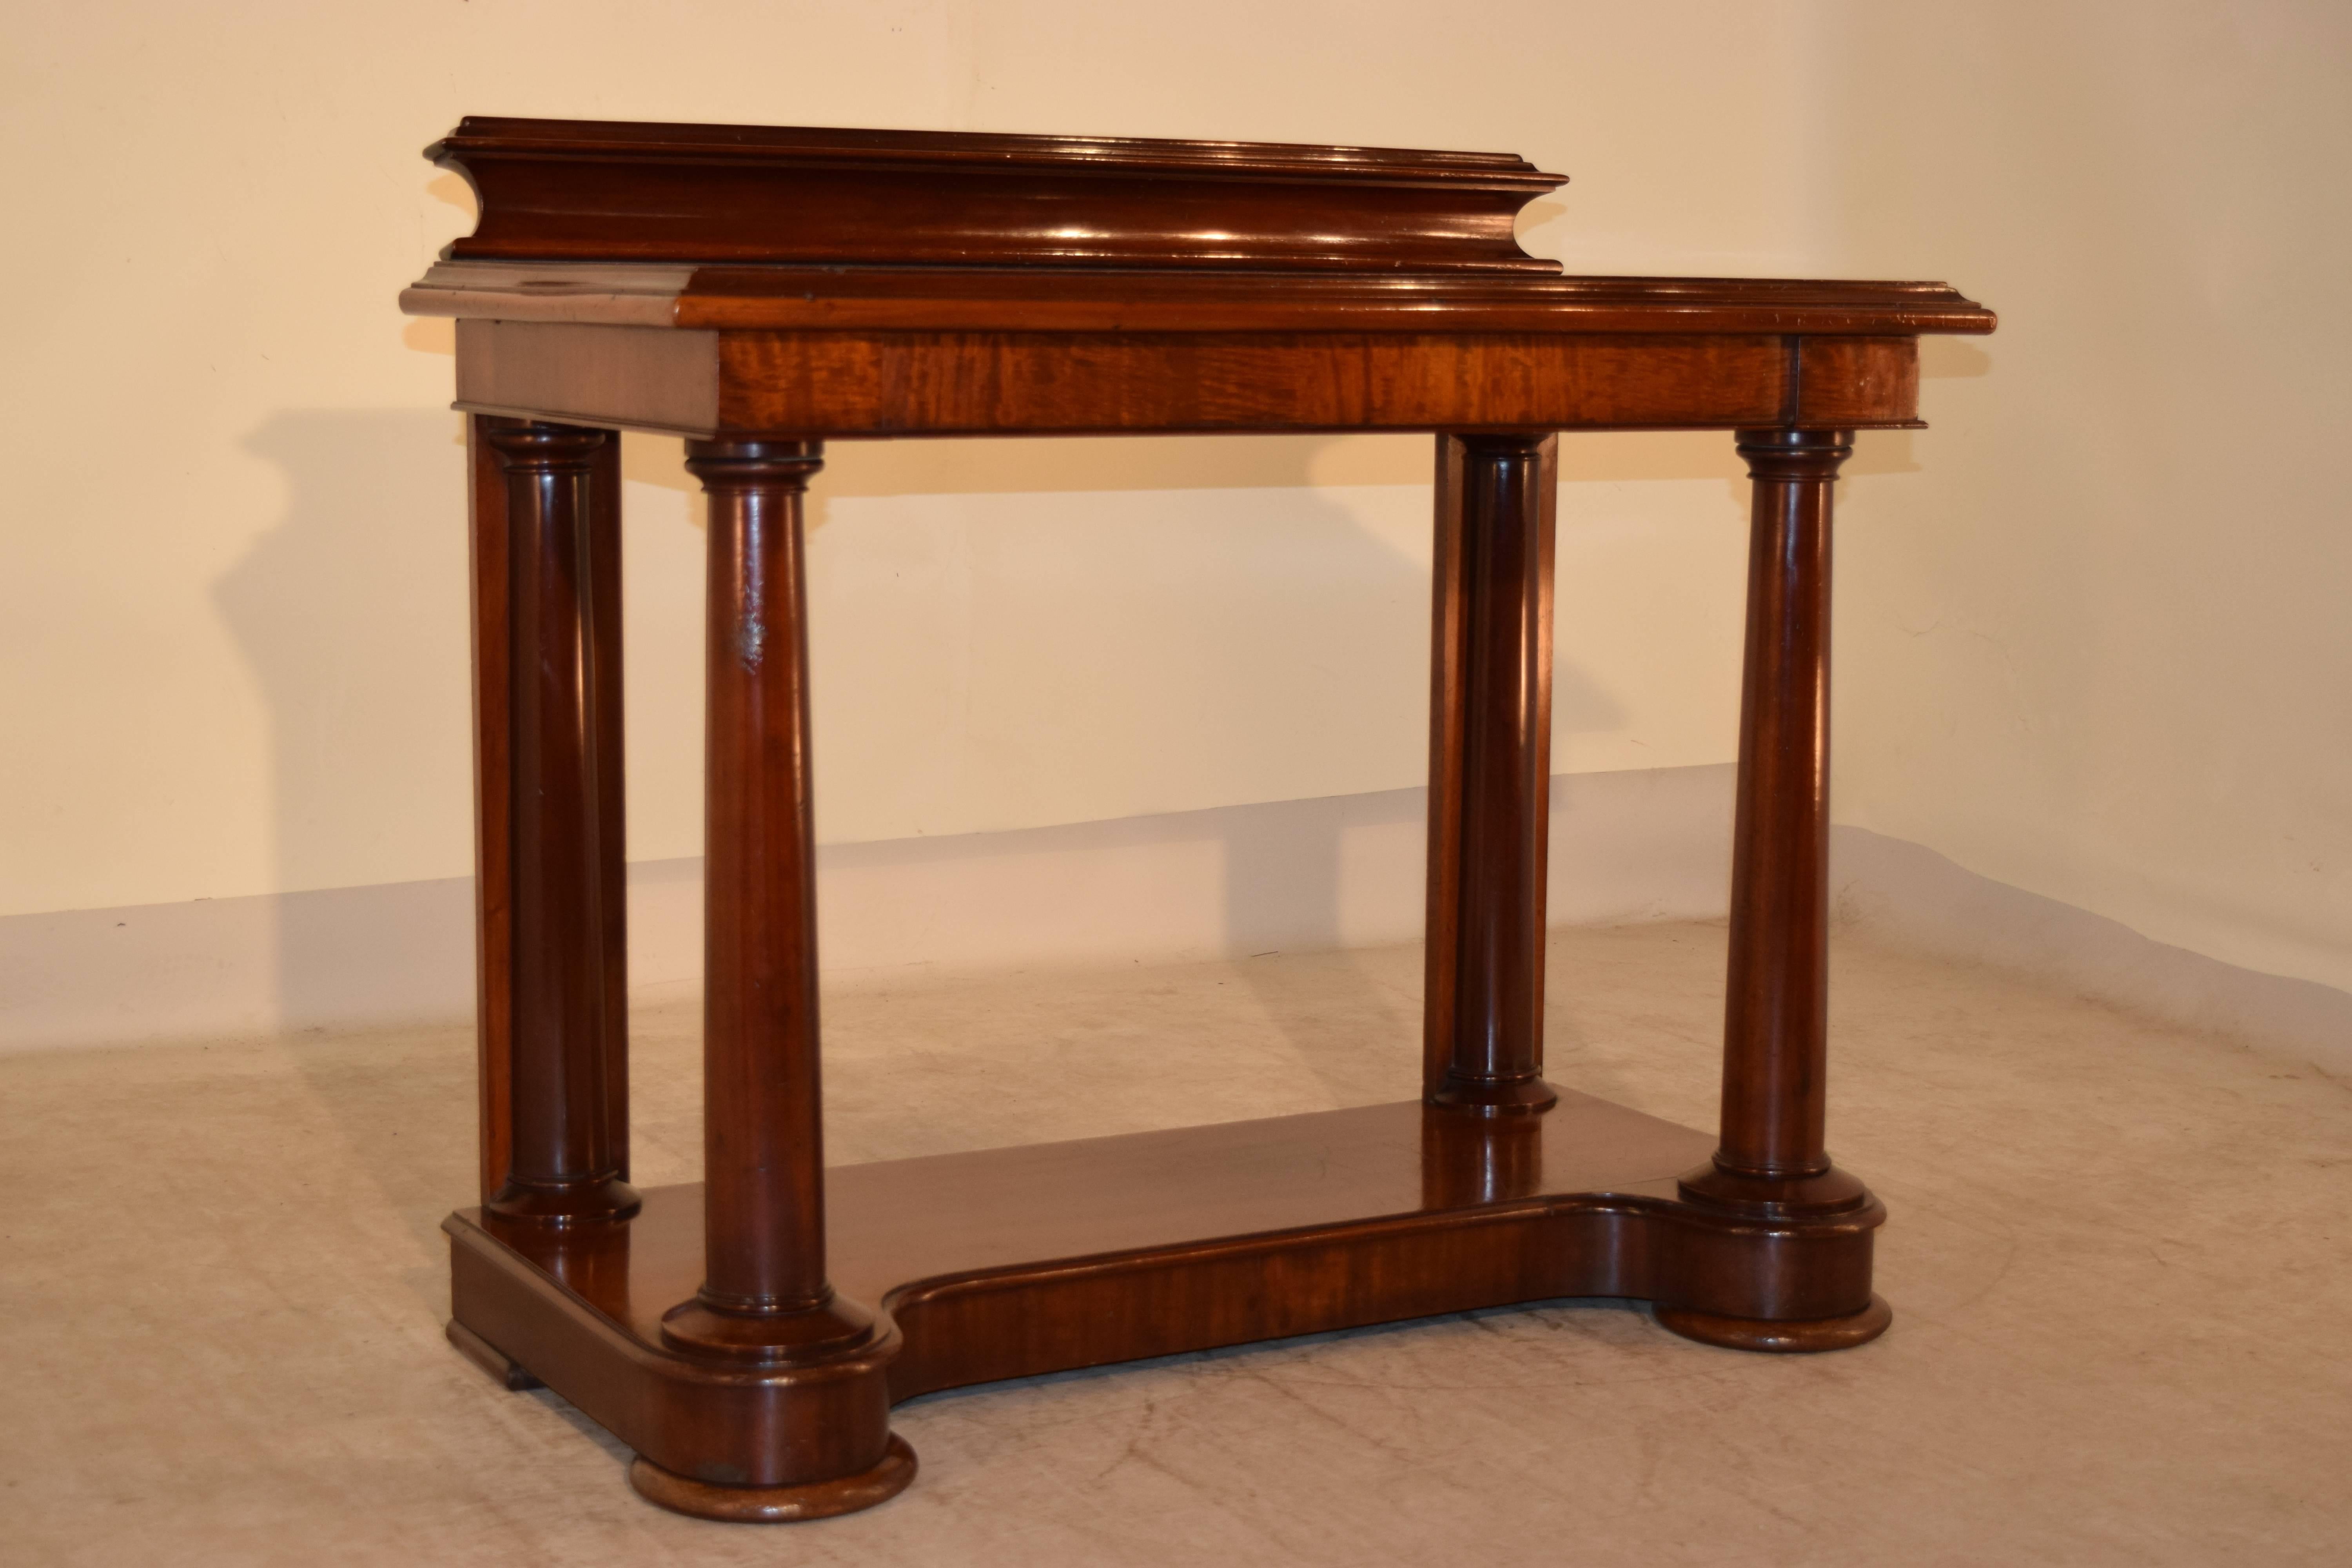 19th century English mahogany console table with a lovely molded backsplash over a gorgeous top with a molded edge and a single drawer in the apron. The piece is supported on hand-turned columns in the front and flat back legs with applied half